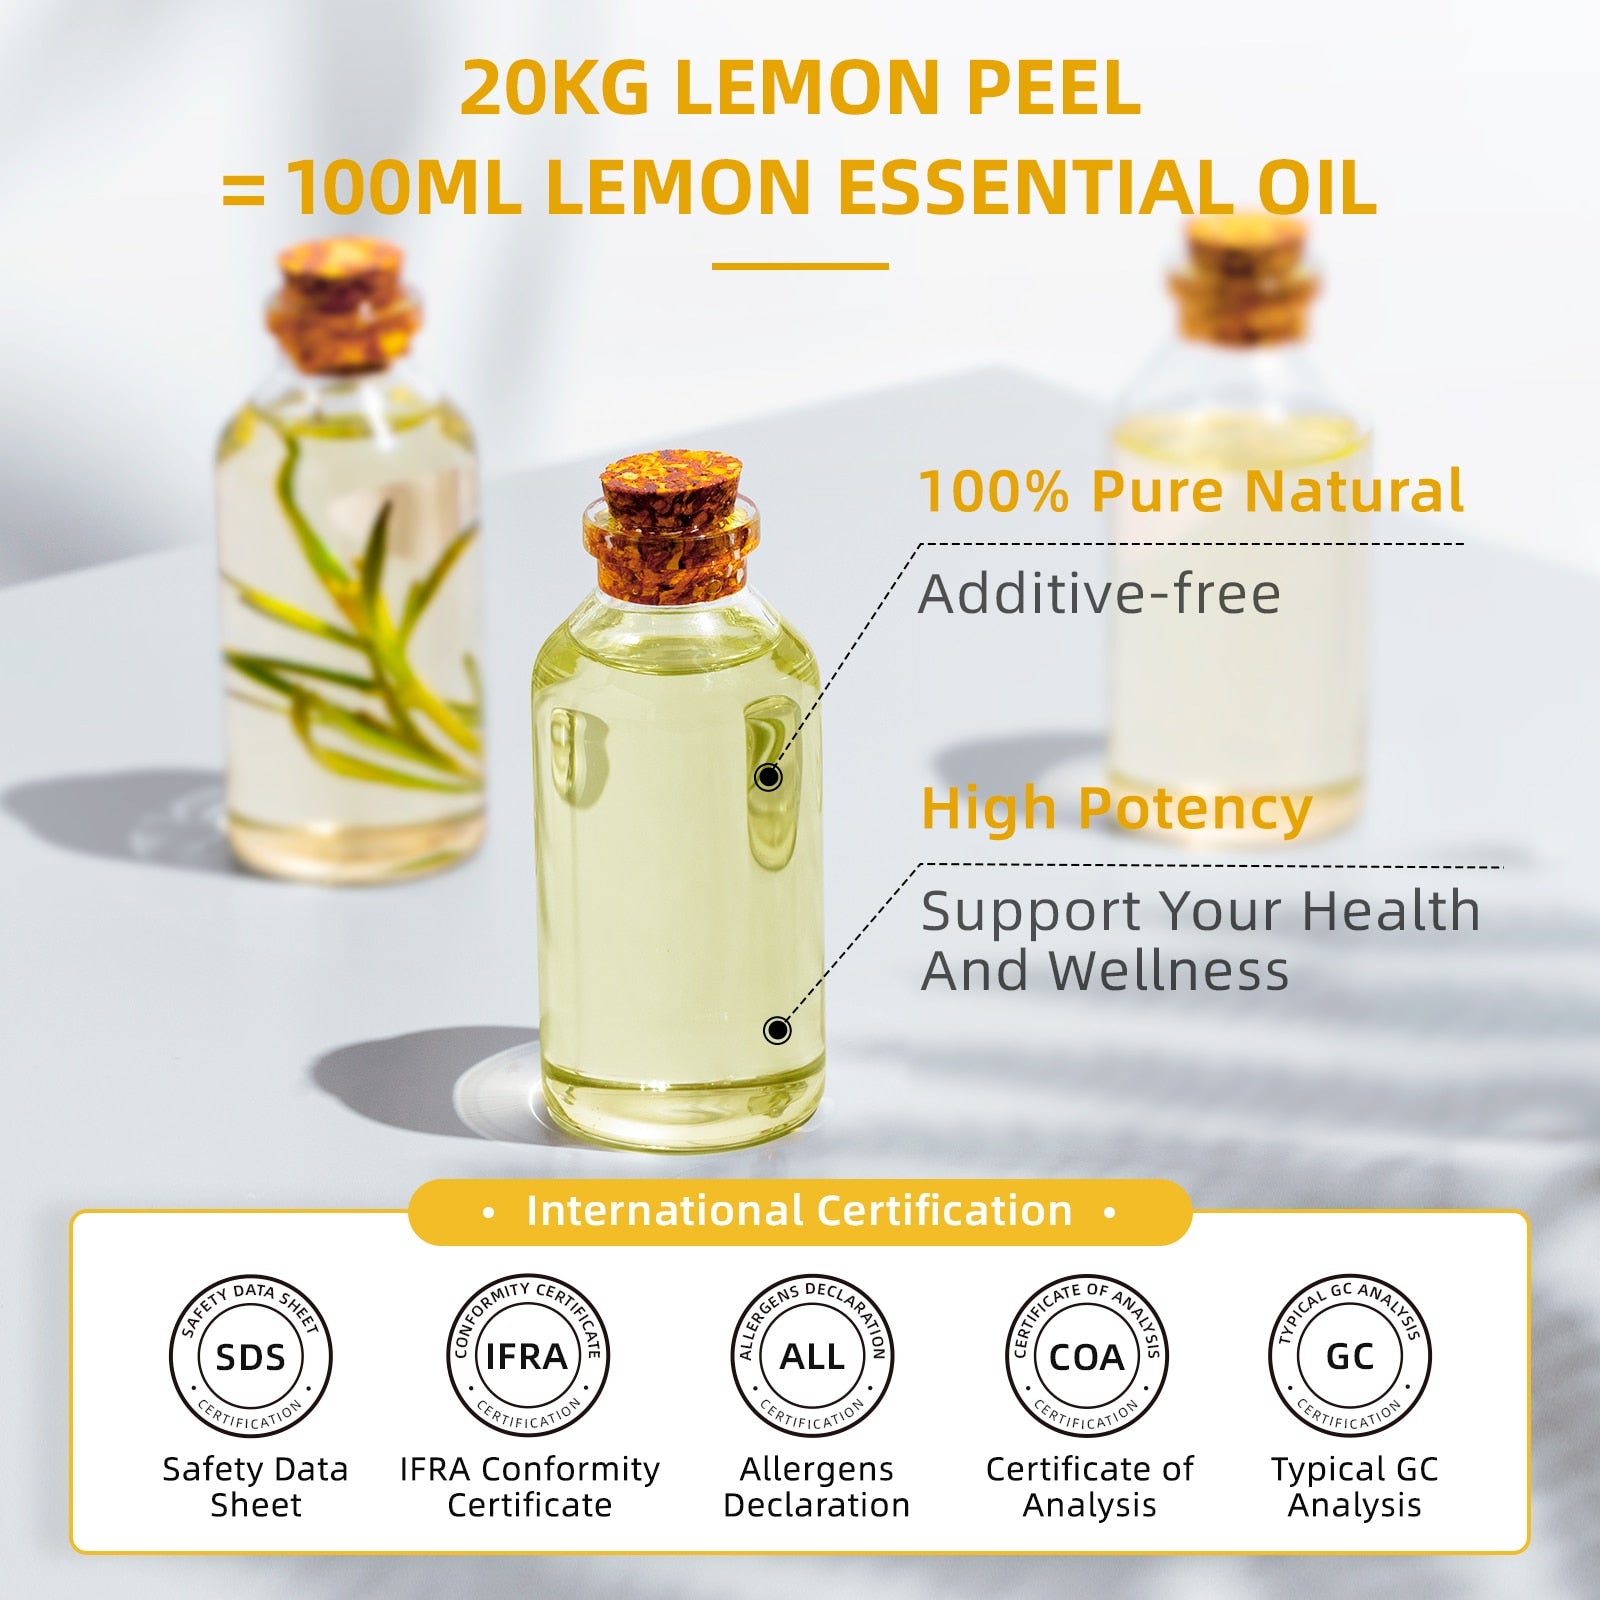 HIQILI 100ML Lemon Essential Oils for Diffuser/Humidifier/Massage/Aromatherapy Aromatic Oil for Candle/Soap Making &amp; Hair Care - youronestopstore23